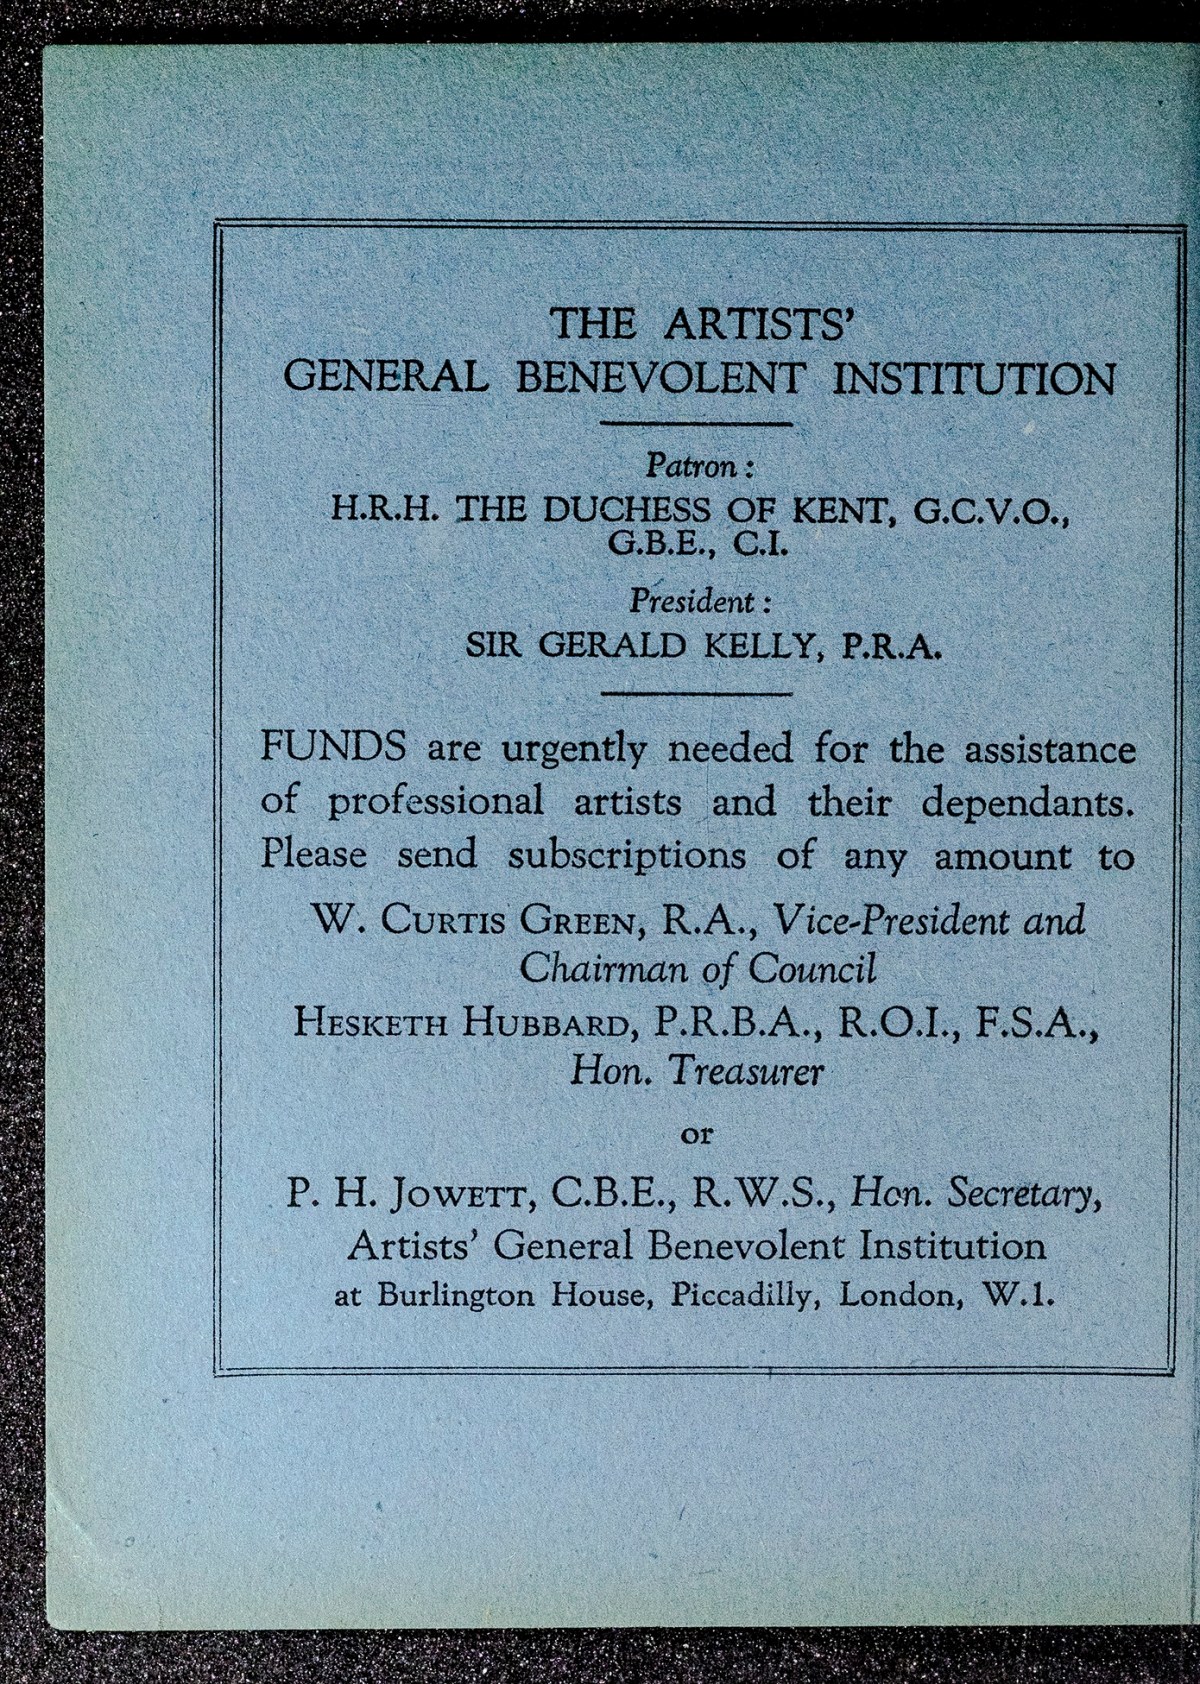 The Exhibition Of The Royal Academy 1954 The 186th Exhibition Catalogues Ra Collection Royal Academy Of Arts